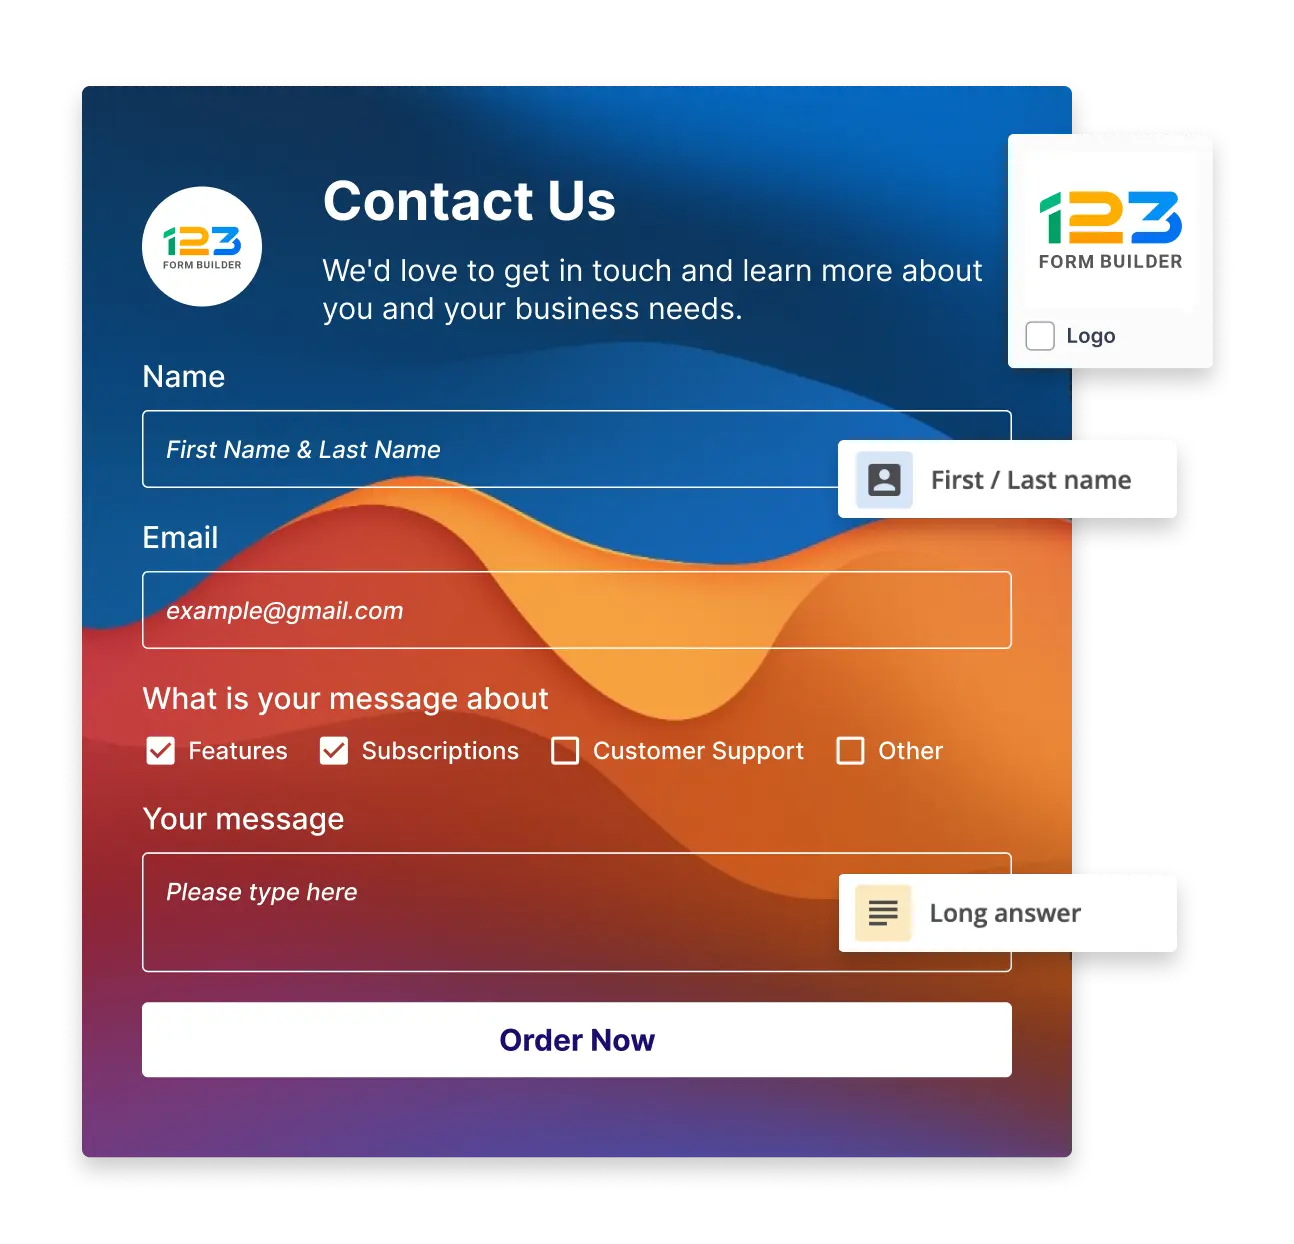 Image showing a 123FormBuilder Contact Us form